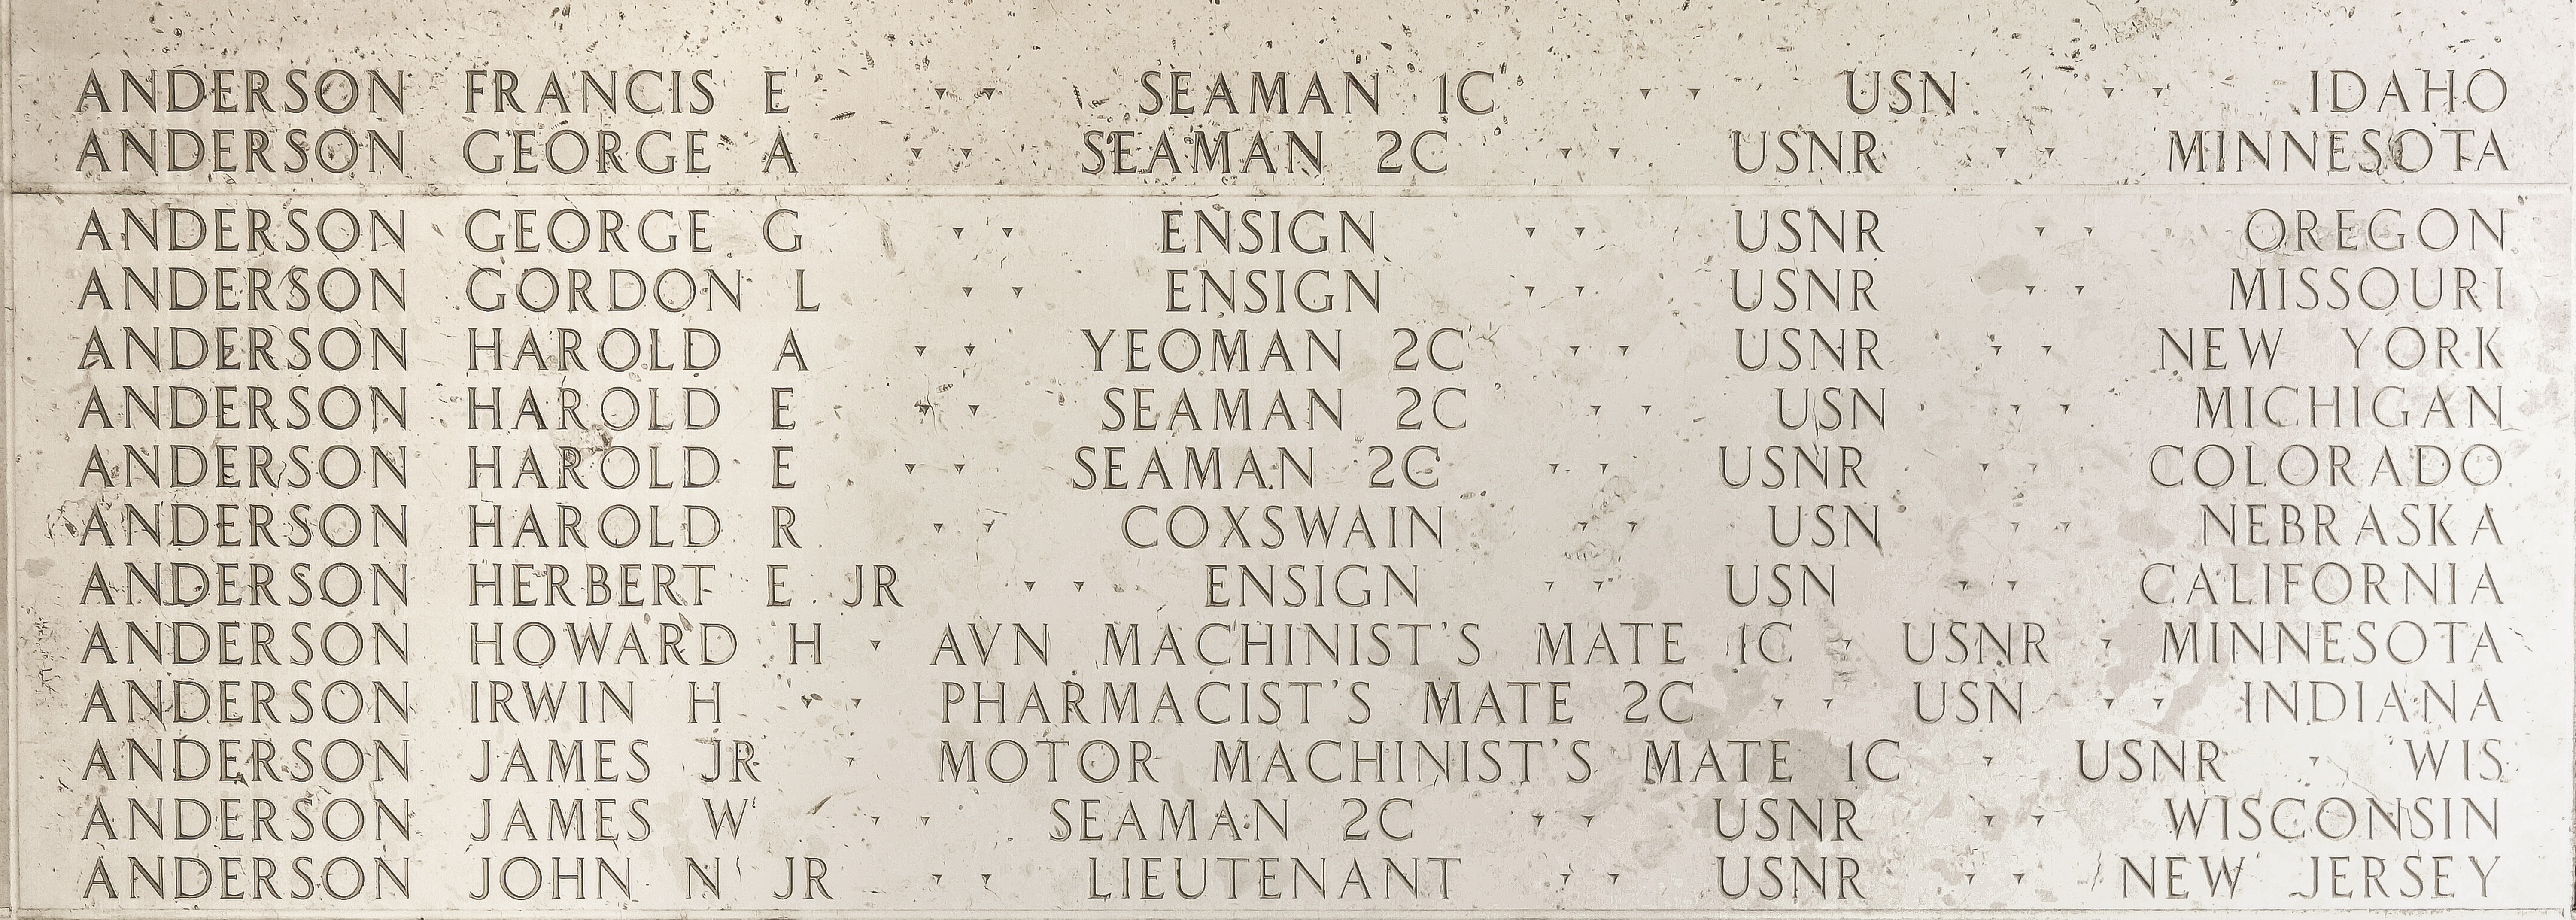 Harold A. Anderson, Yeoman Second Class